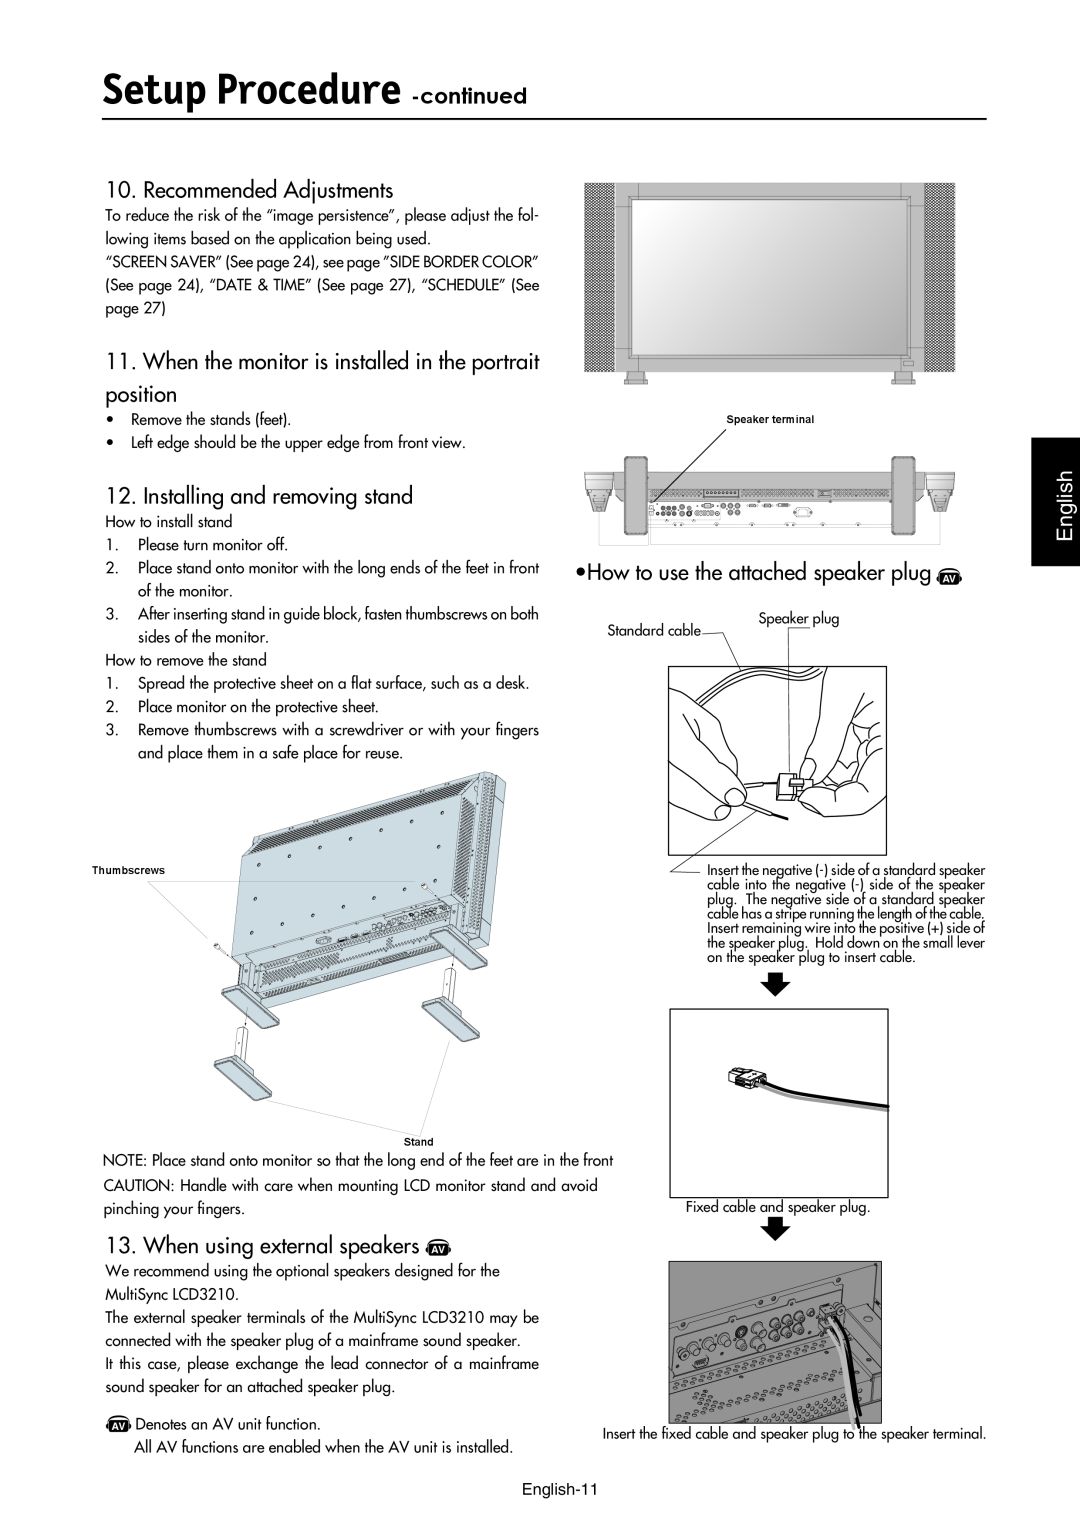 NEC LCD3210 manual Setup Procedure -continued, Recommended Adjustments, Installing and removing stand, English-11 